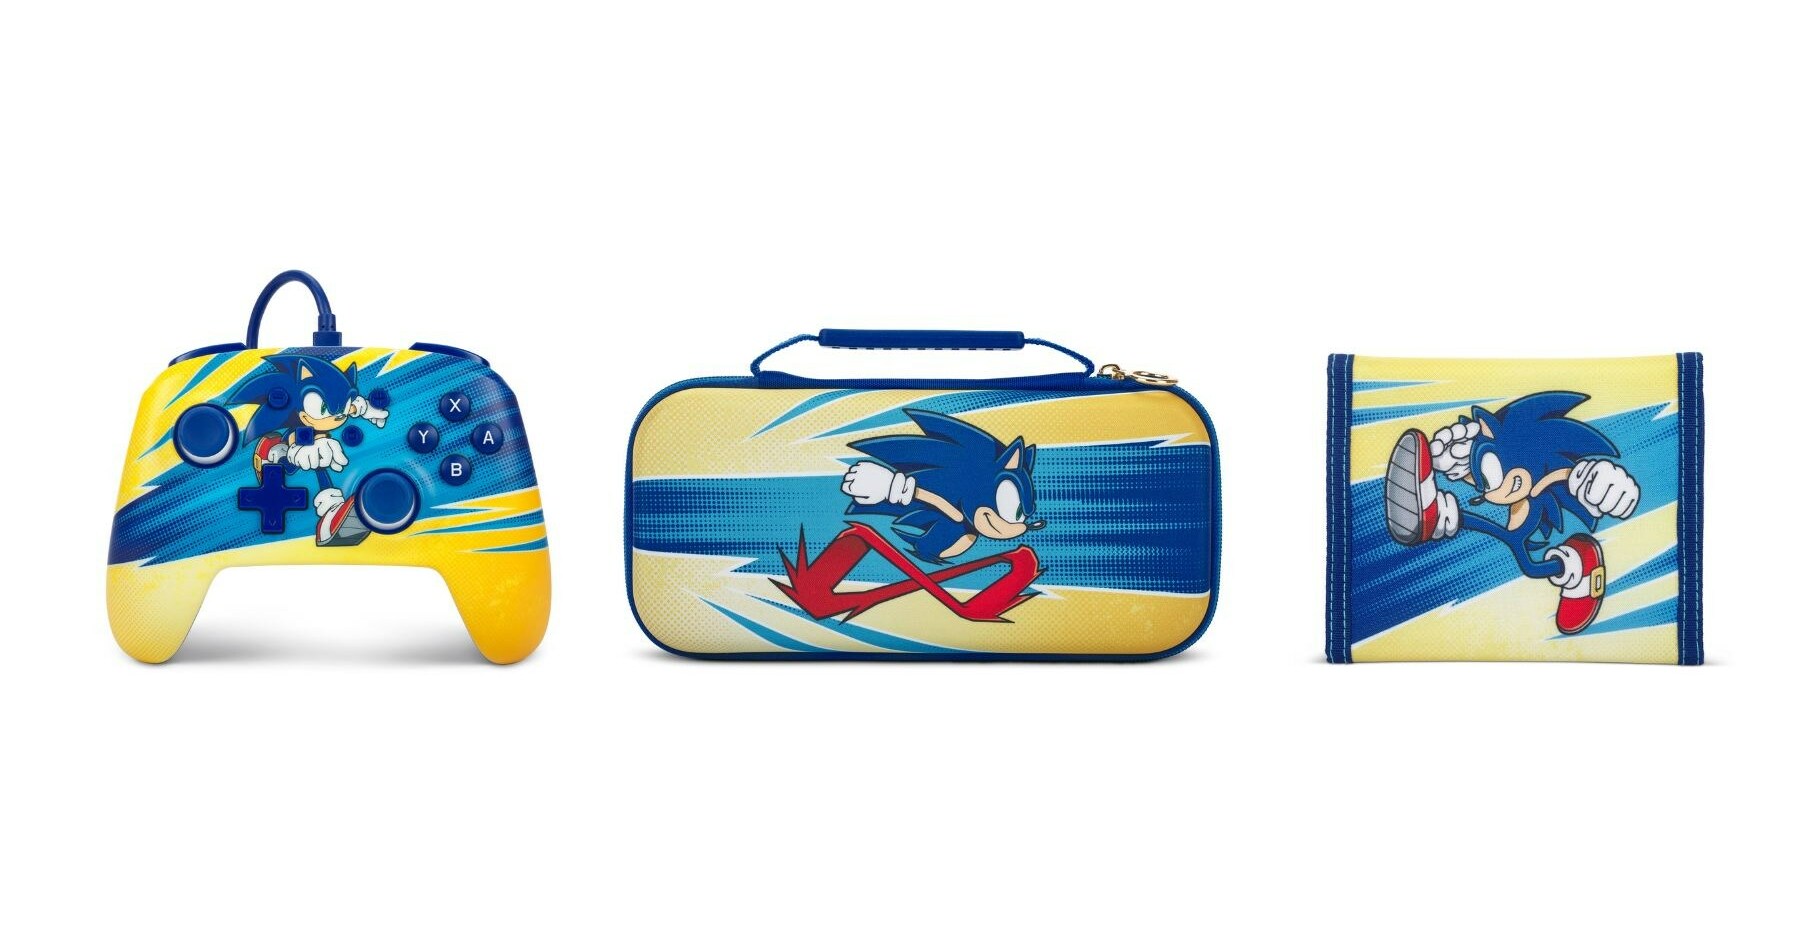  Sonic the Hedgehog Nintendo Switch Case, Gaming On-the